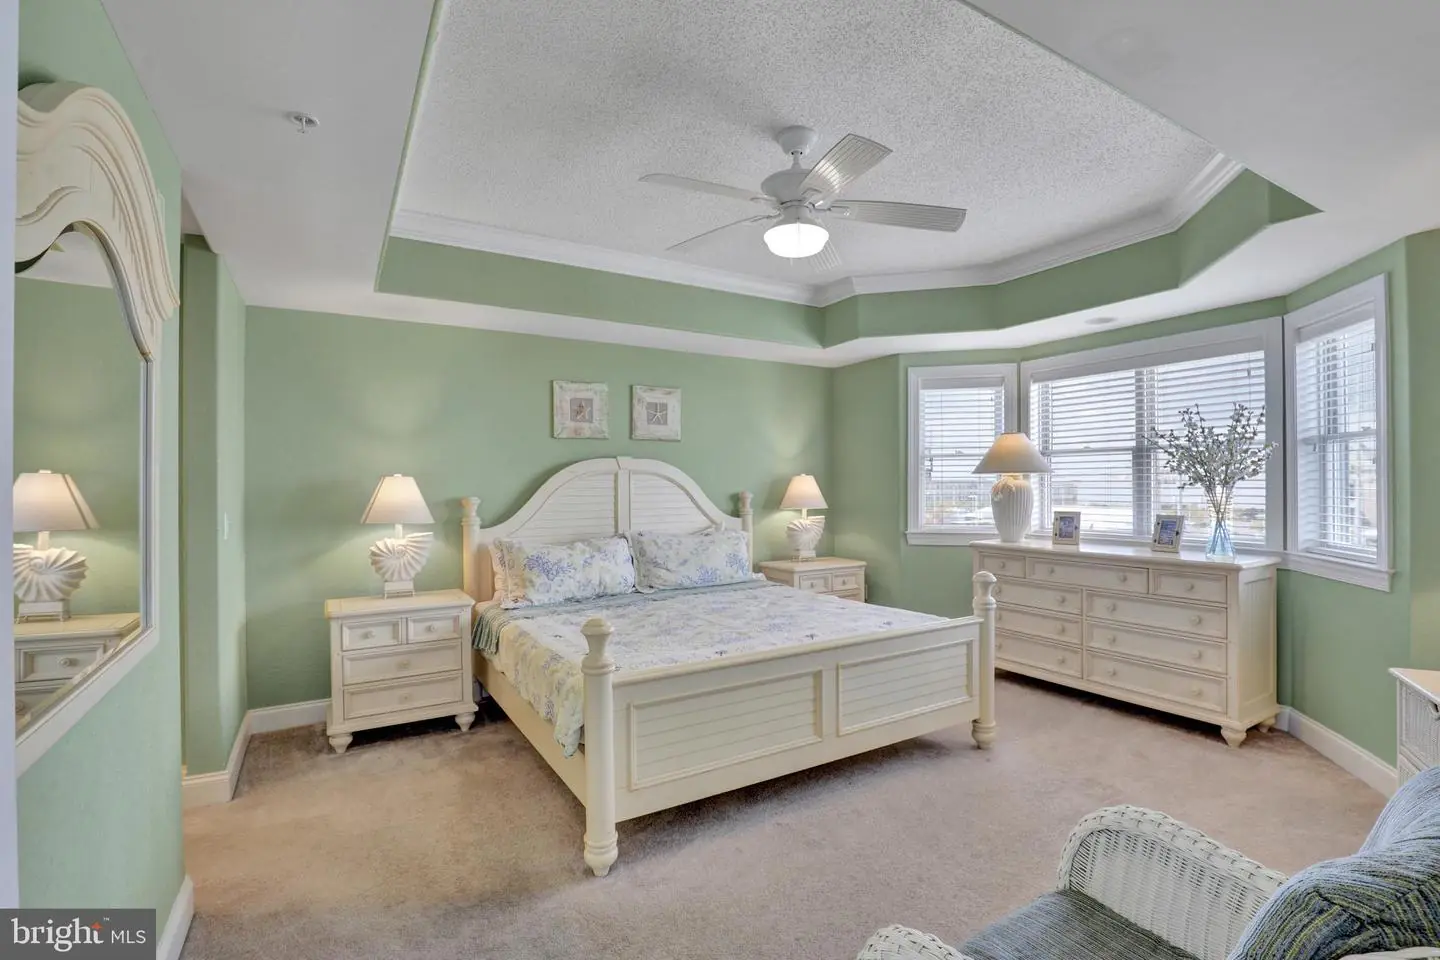 MDWO2015722-802606208928-2024-02-22-09-49-25 18 41st St #302 | Ocean City, MD Real Estate For Sale | MLS# Mdwo2015722  - 1st Choice Properties